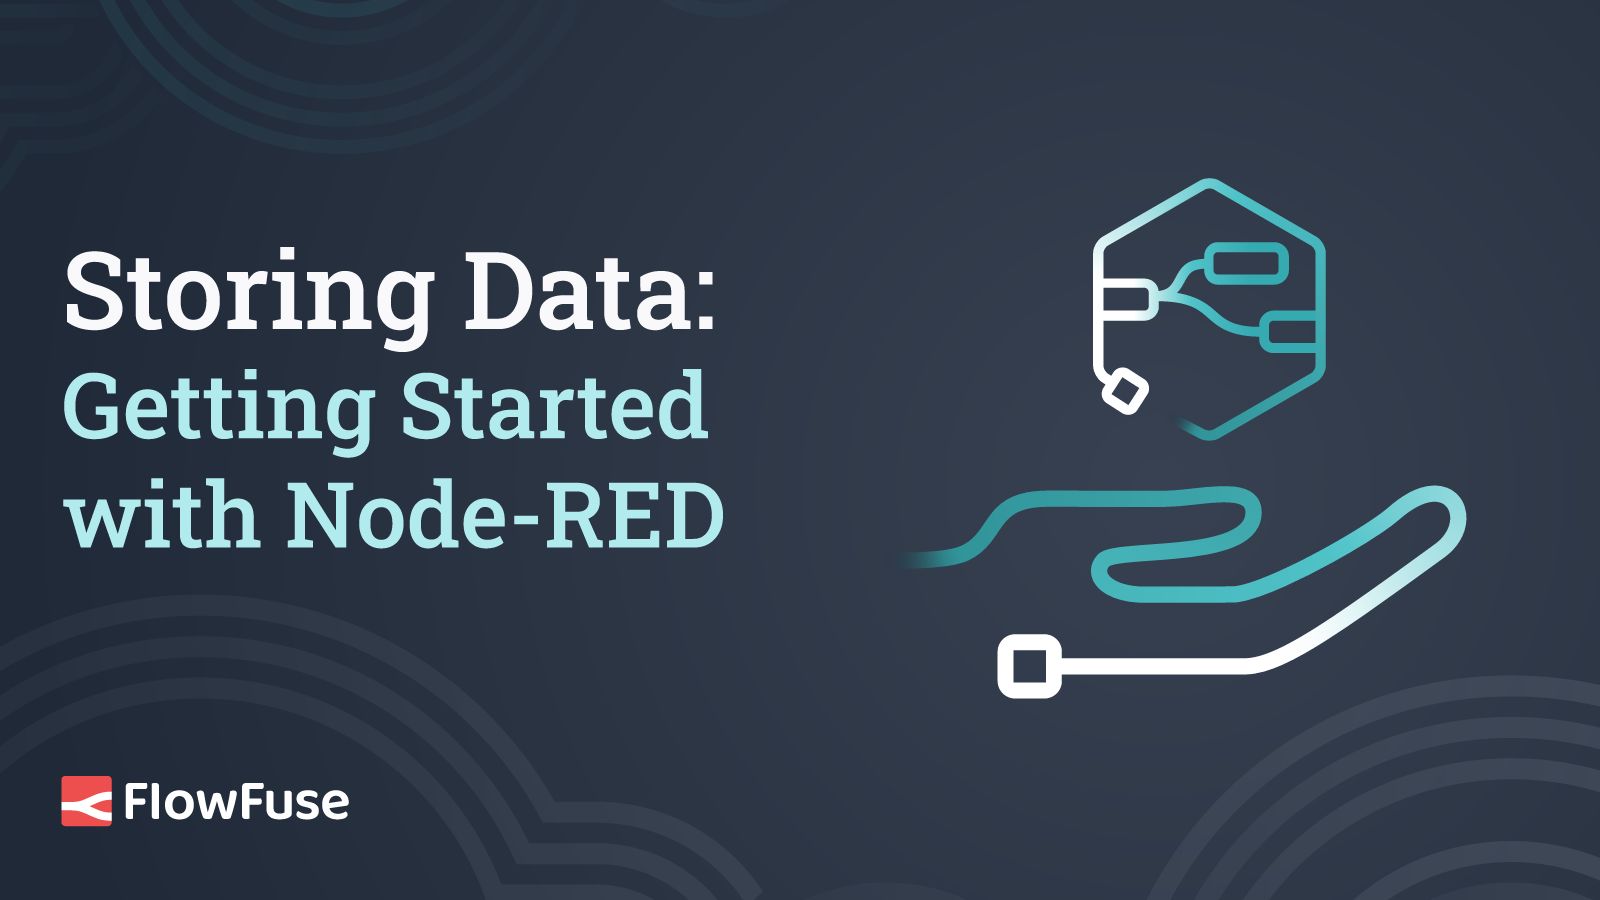 Image representing Storing Data: Getting Started with Node-RED